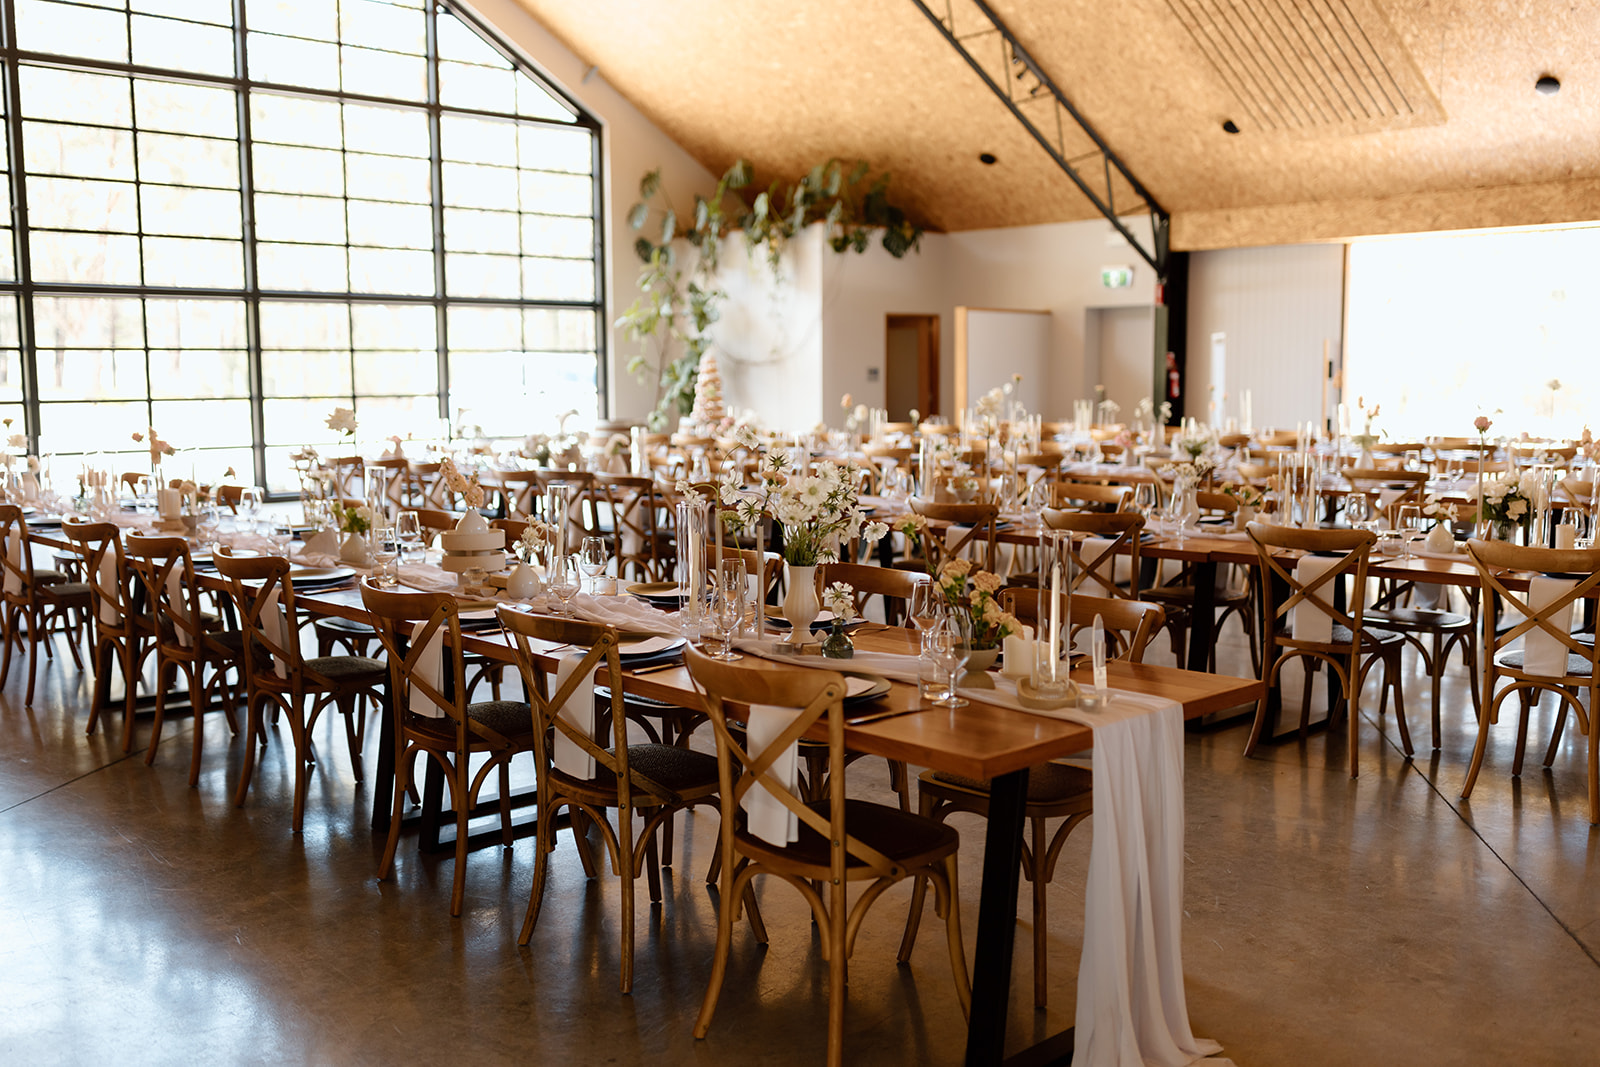 Wedding reception details in the South Coast Bawley Vale Estate